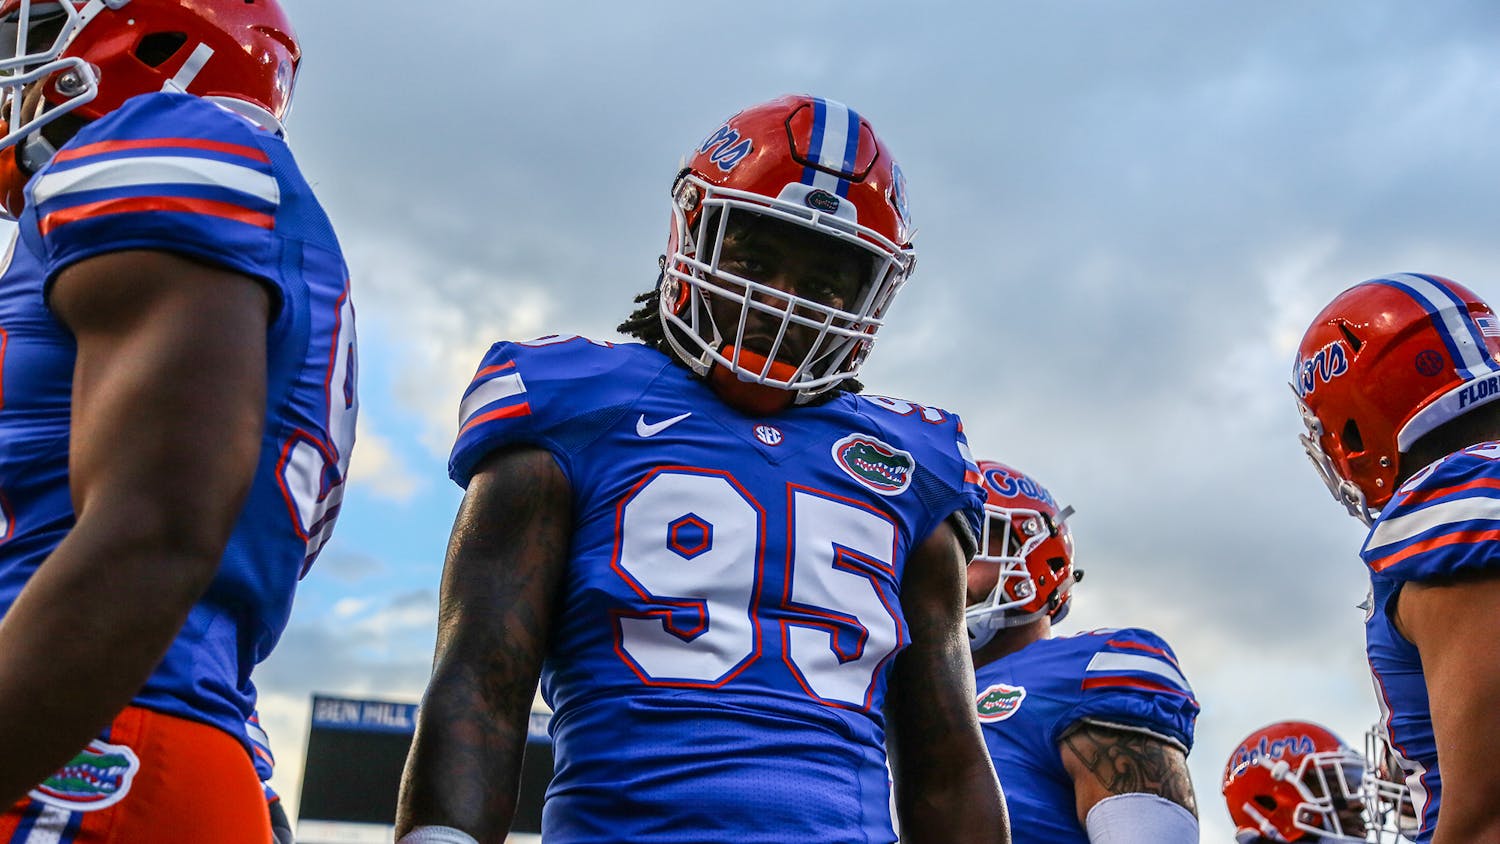 Florida defensive lineman Keivonnis Davis did not play in 2017 following an indefinite suspension from then-head coach Jim McElwain. 